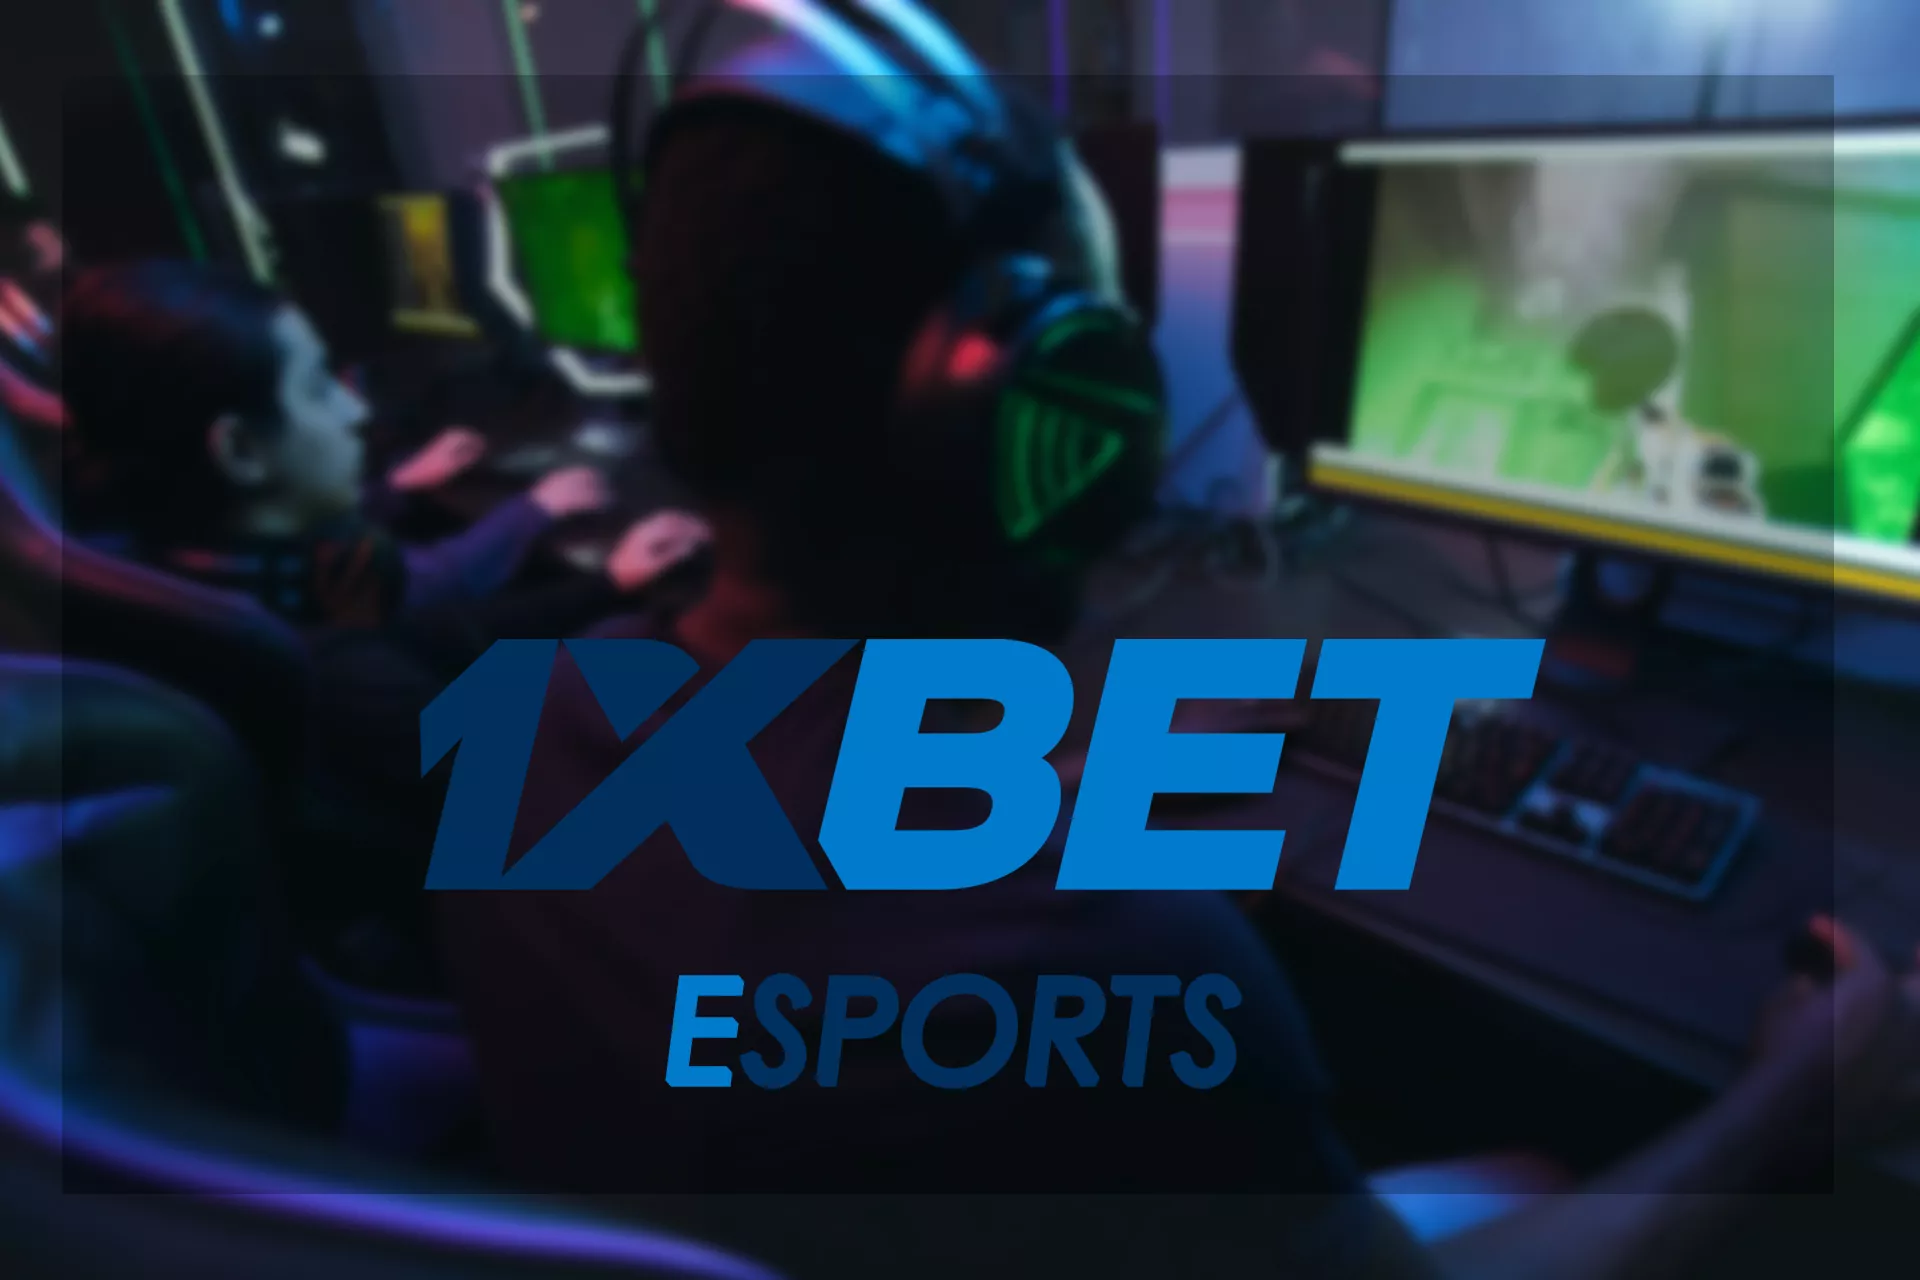 During cybersports tournaments 1xBet offers special bonuses.